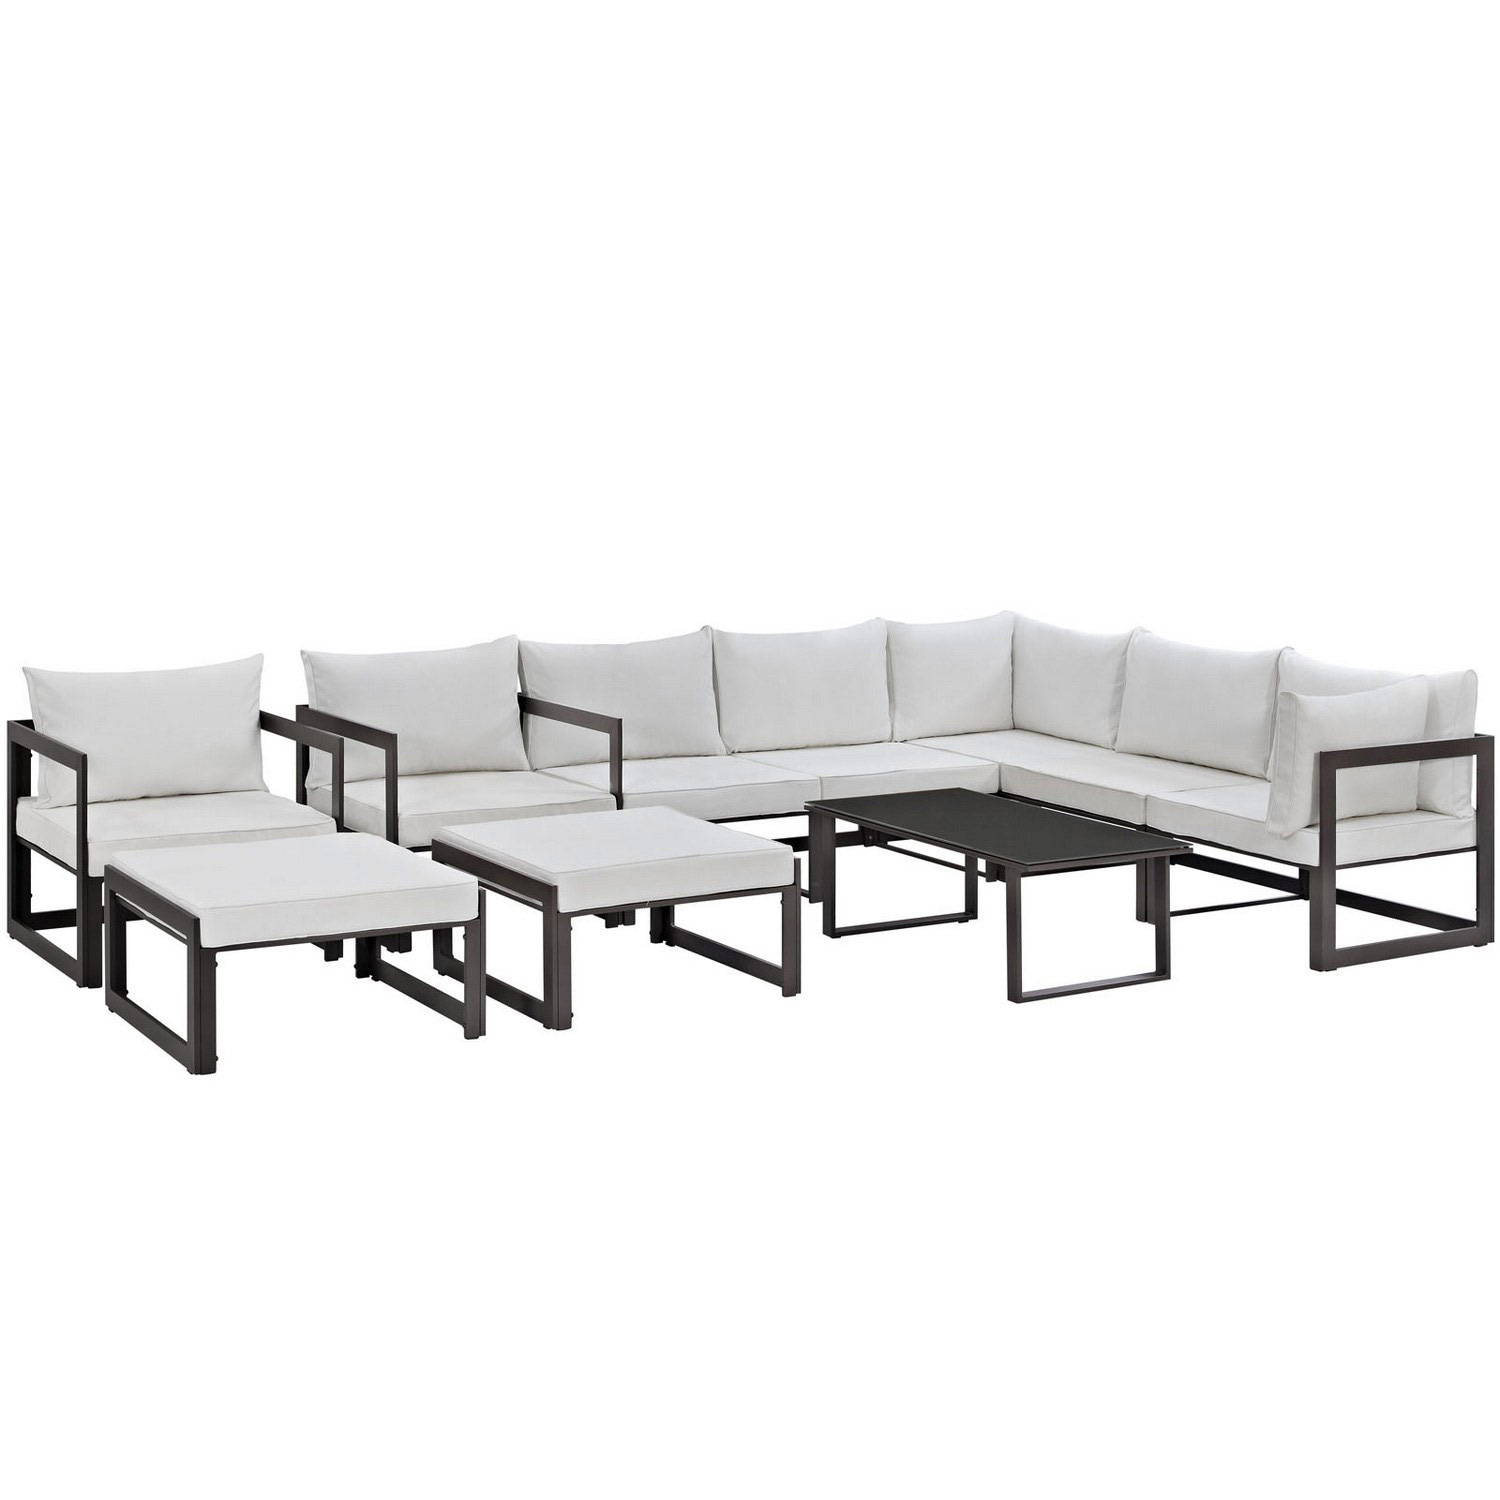 Modway Fortuna 10 Piece Outdoor Patio Sectional Sofa Set - Brown/White